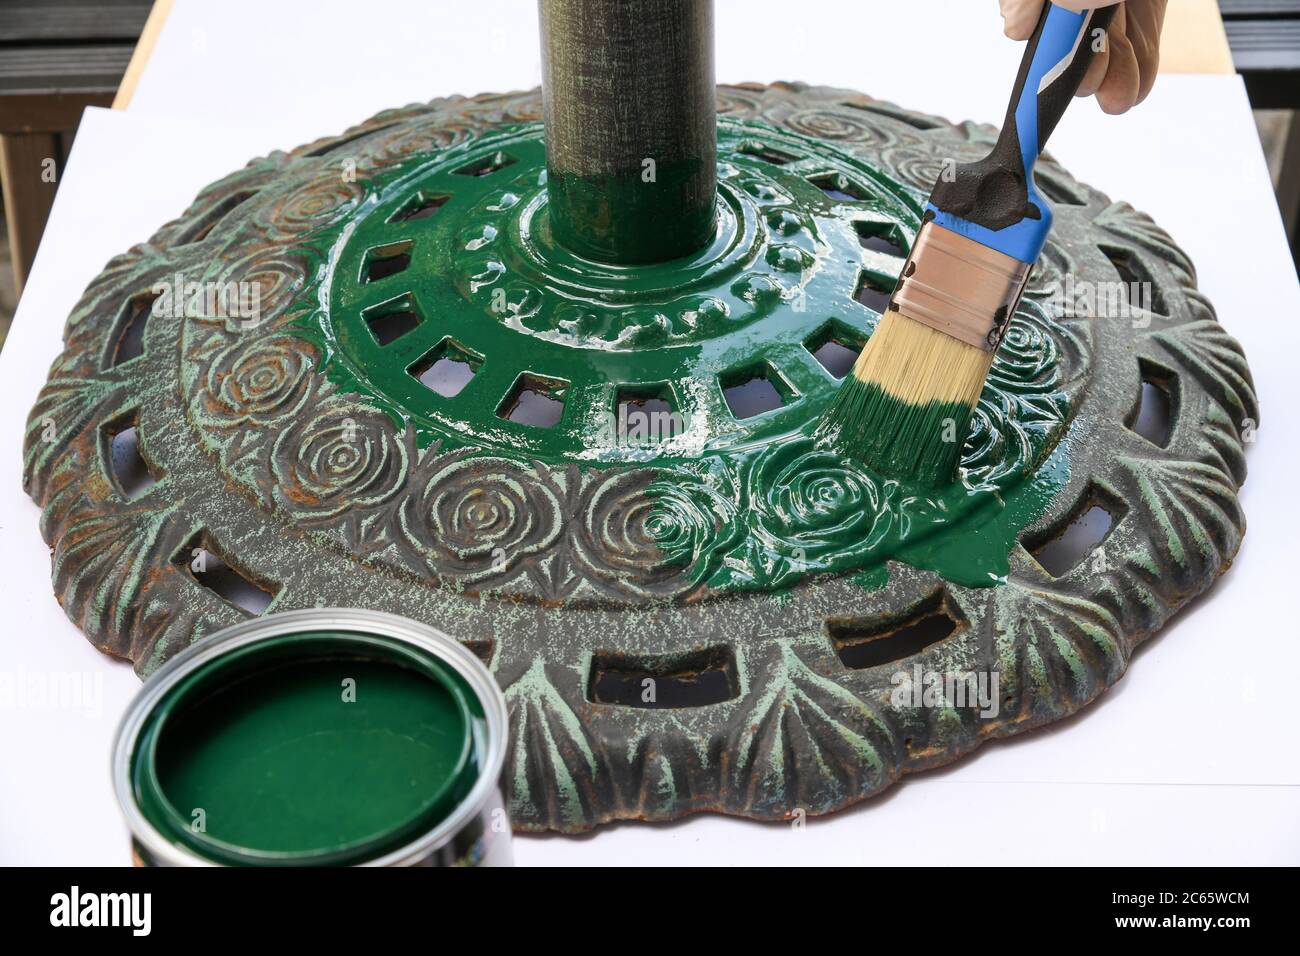 Person painting an ornate circular cast iron base with green paint in a close up view on the opened pot of pigment and paintbrush in a DIY concept Stock Photo